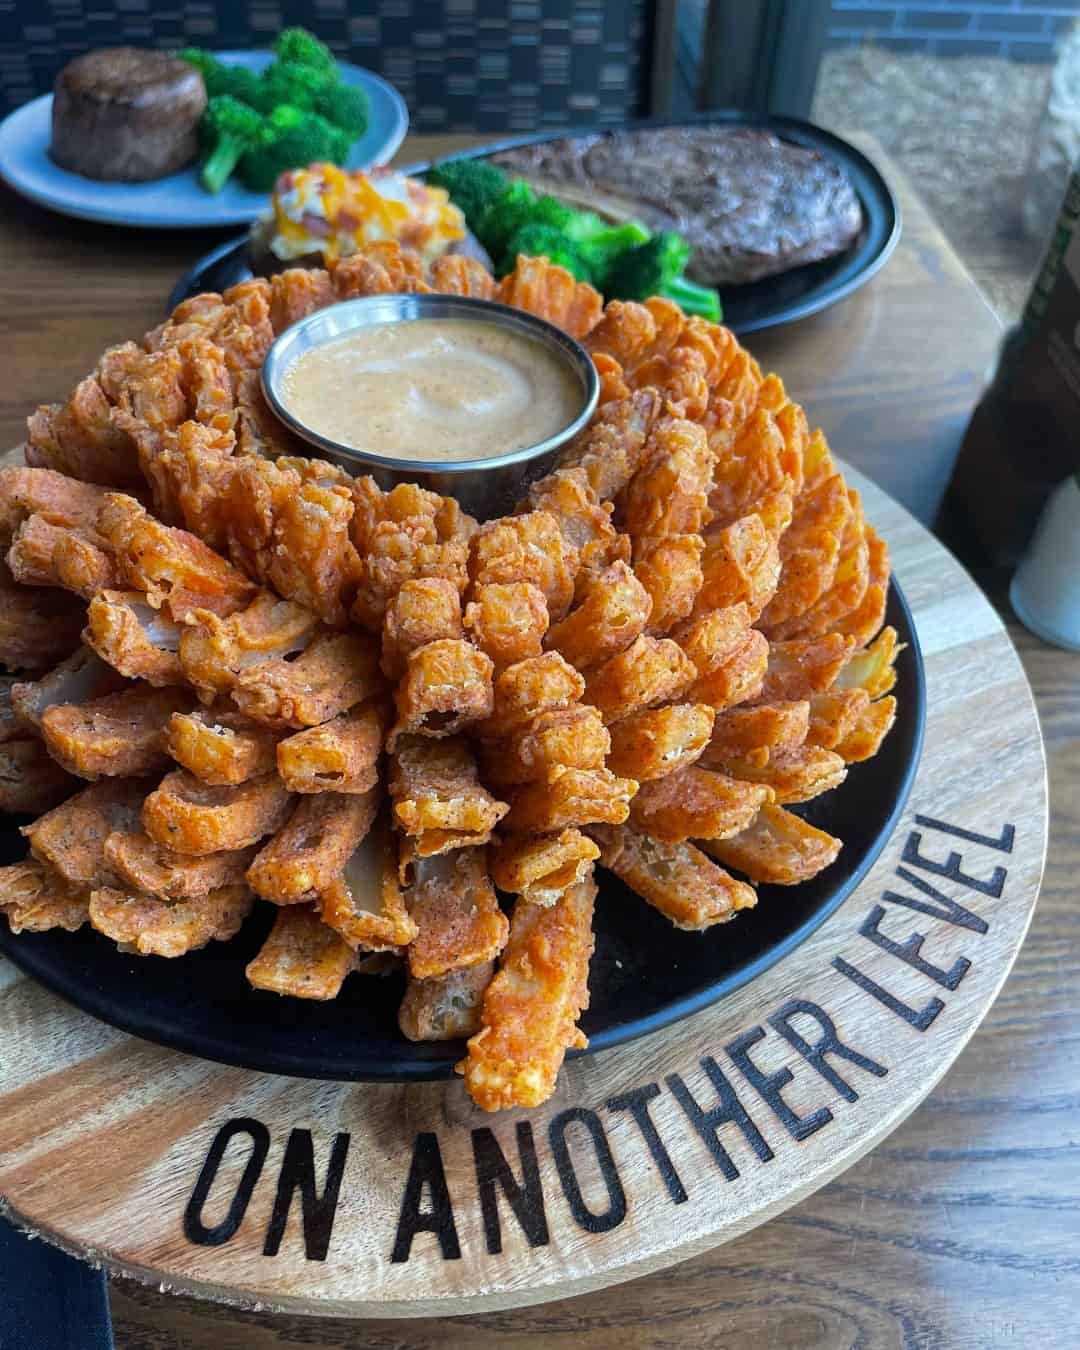 Enjoy free Bloomin' Onion at Outback Steakhouse on National Onion Day